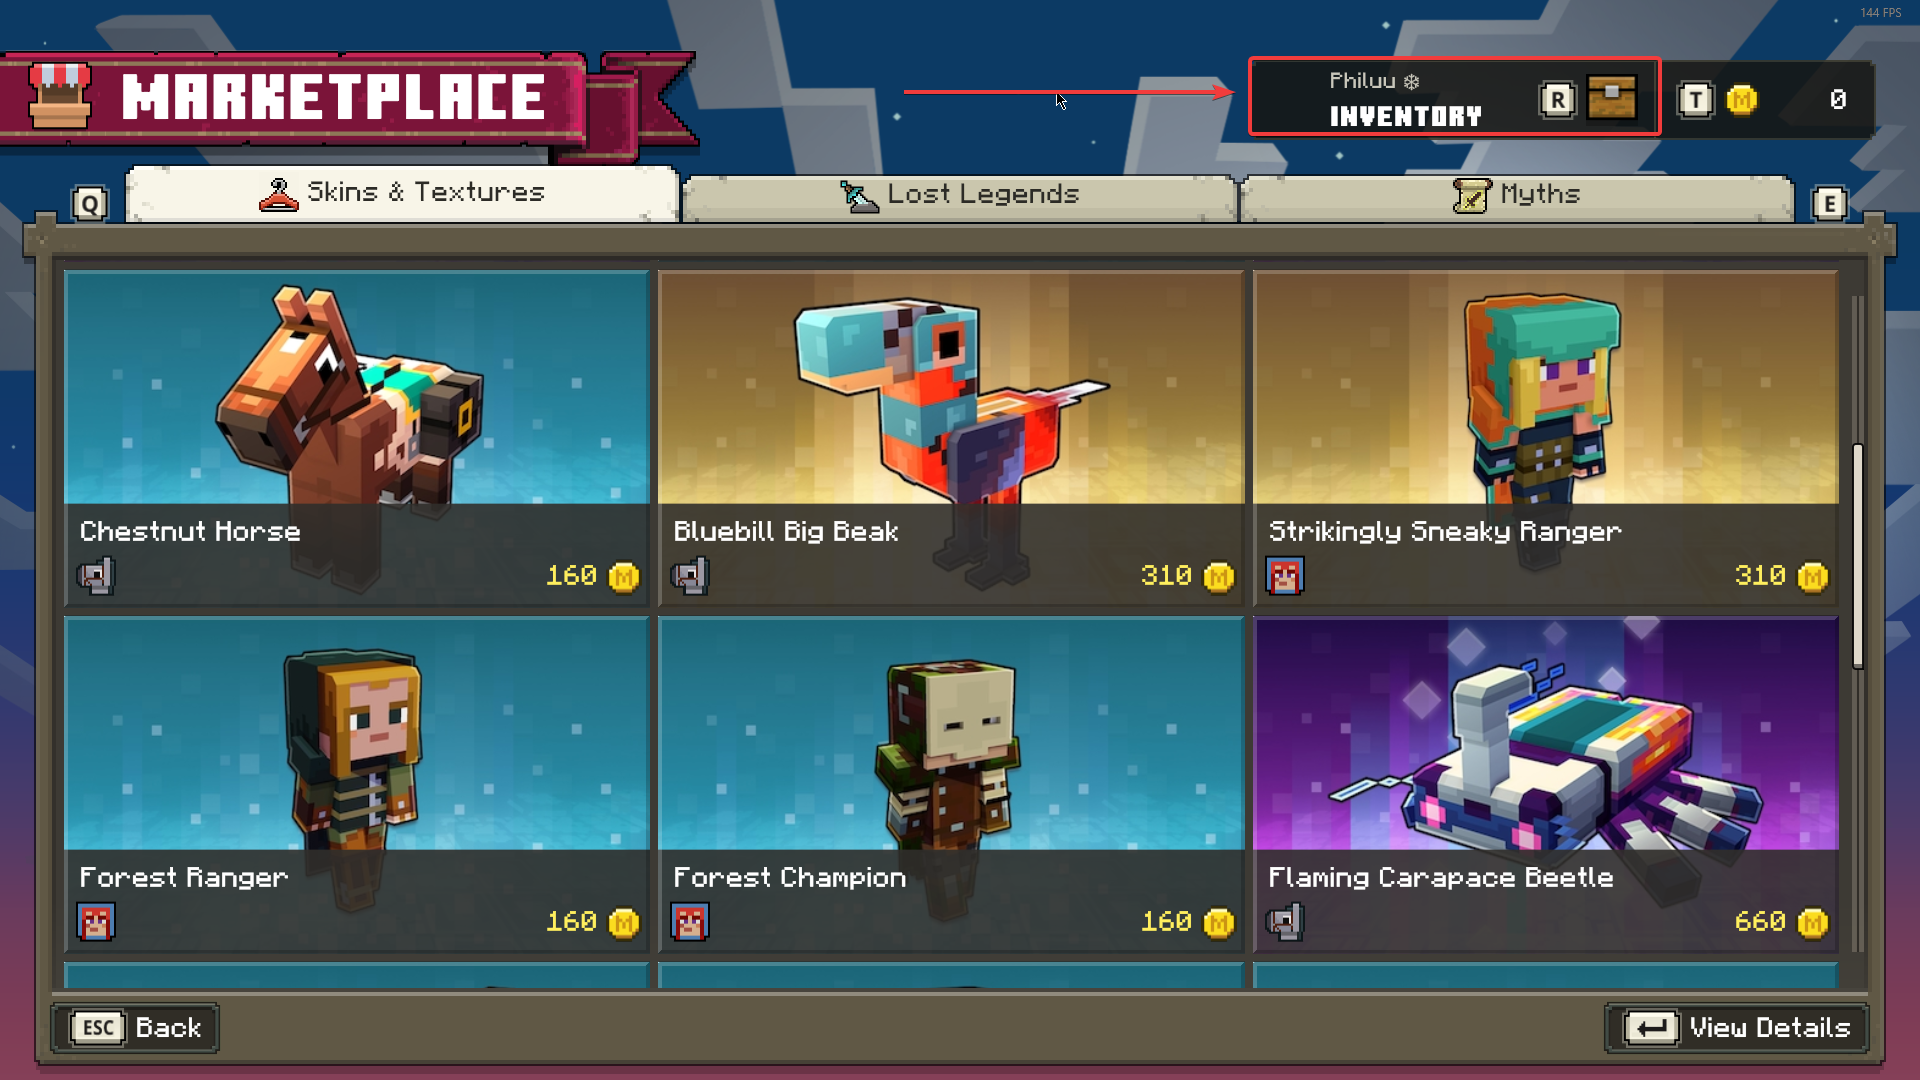 Minecraft Legends - Guide how to redeem the Deluxe Edition DLC - 1. In the Main Menu, head to the Marketplace - 2302E52